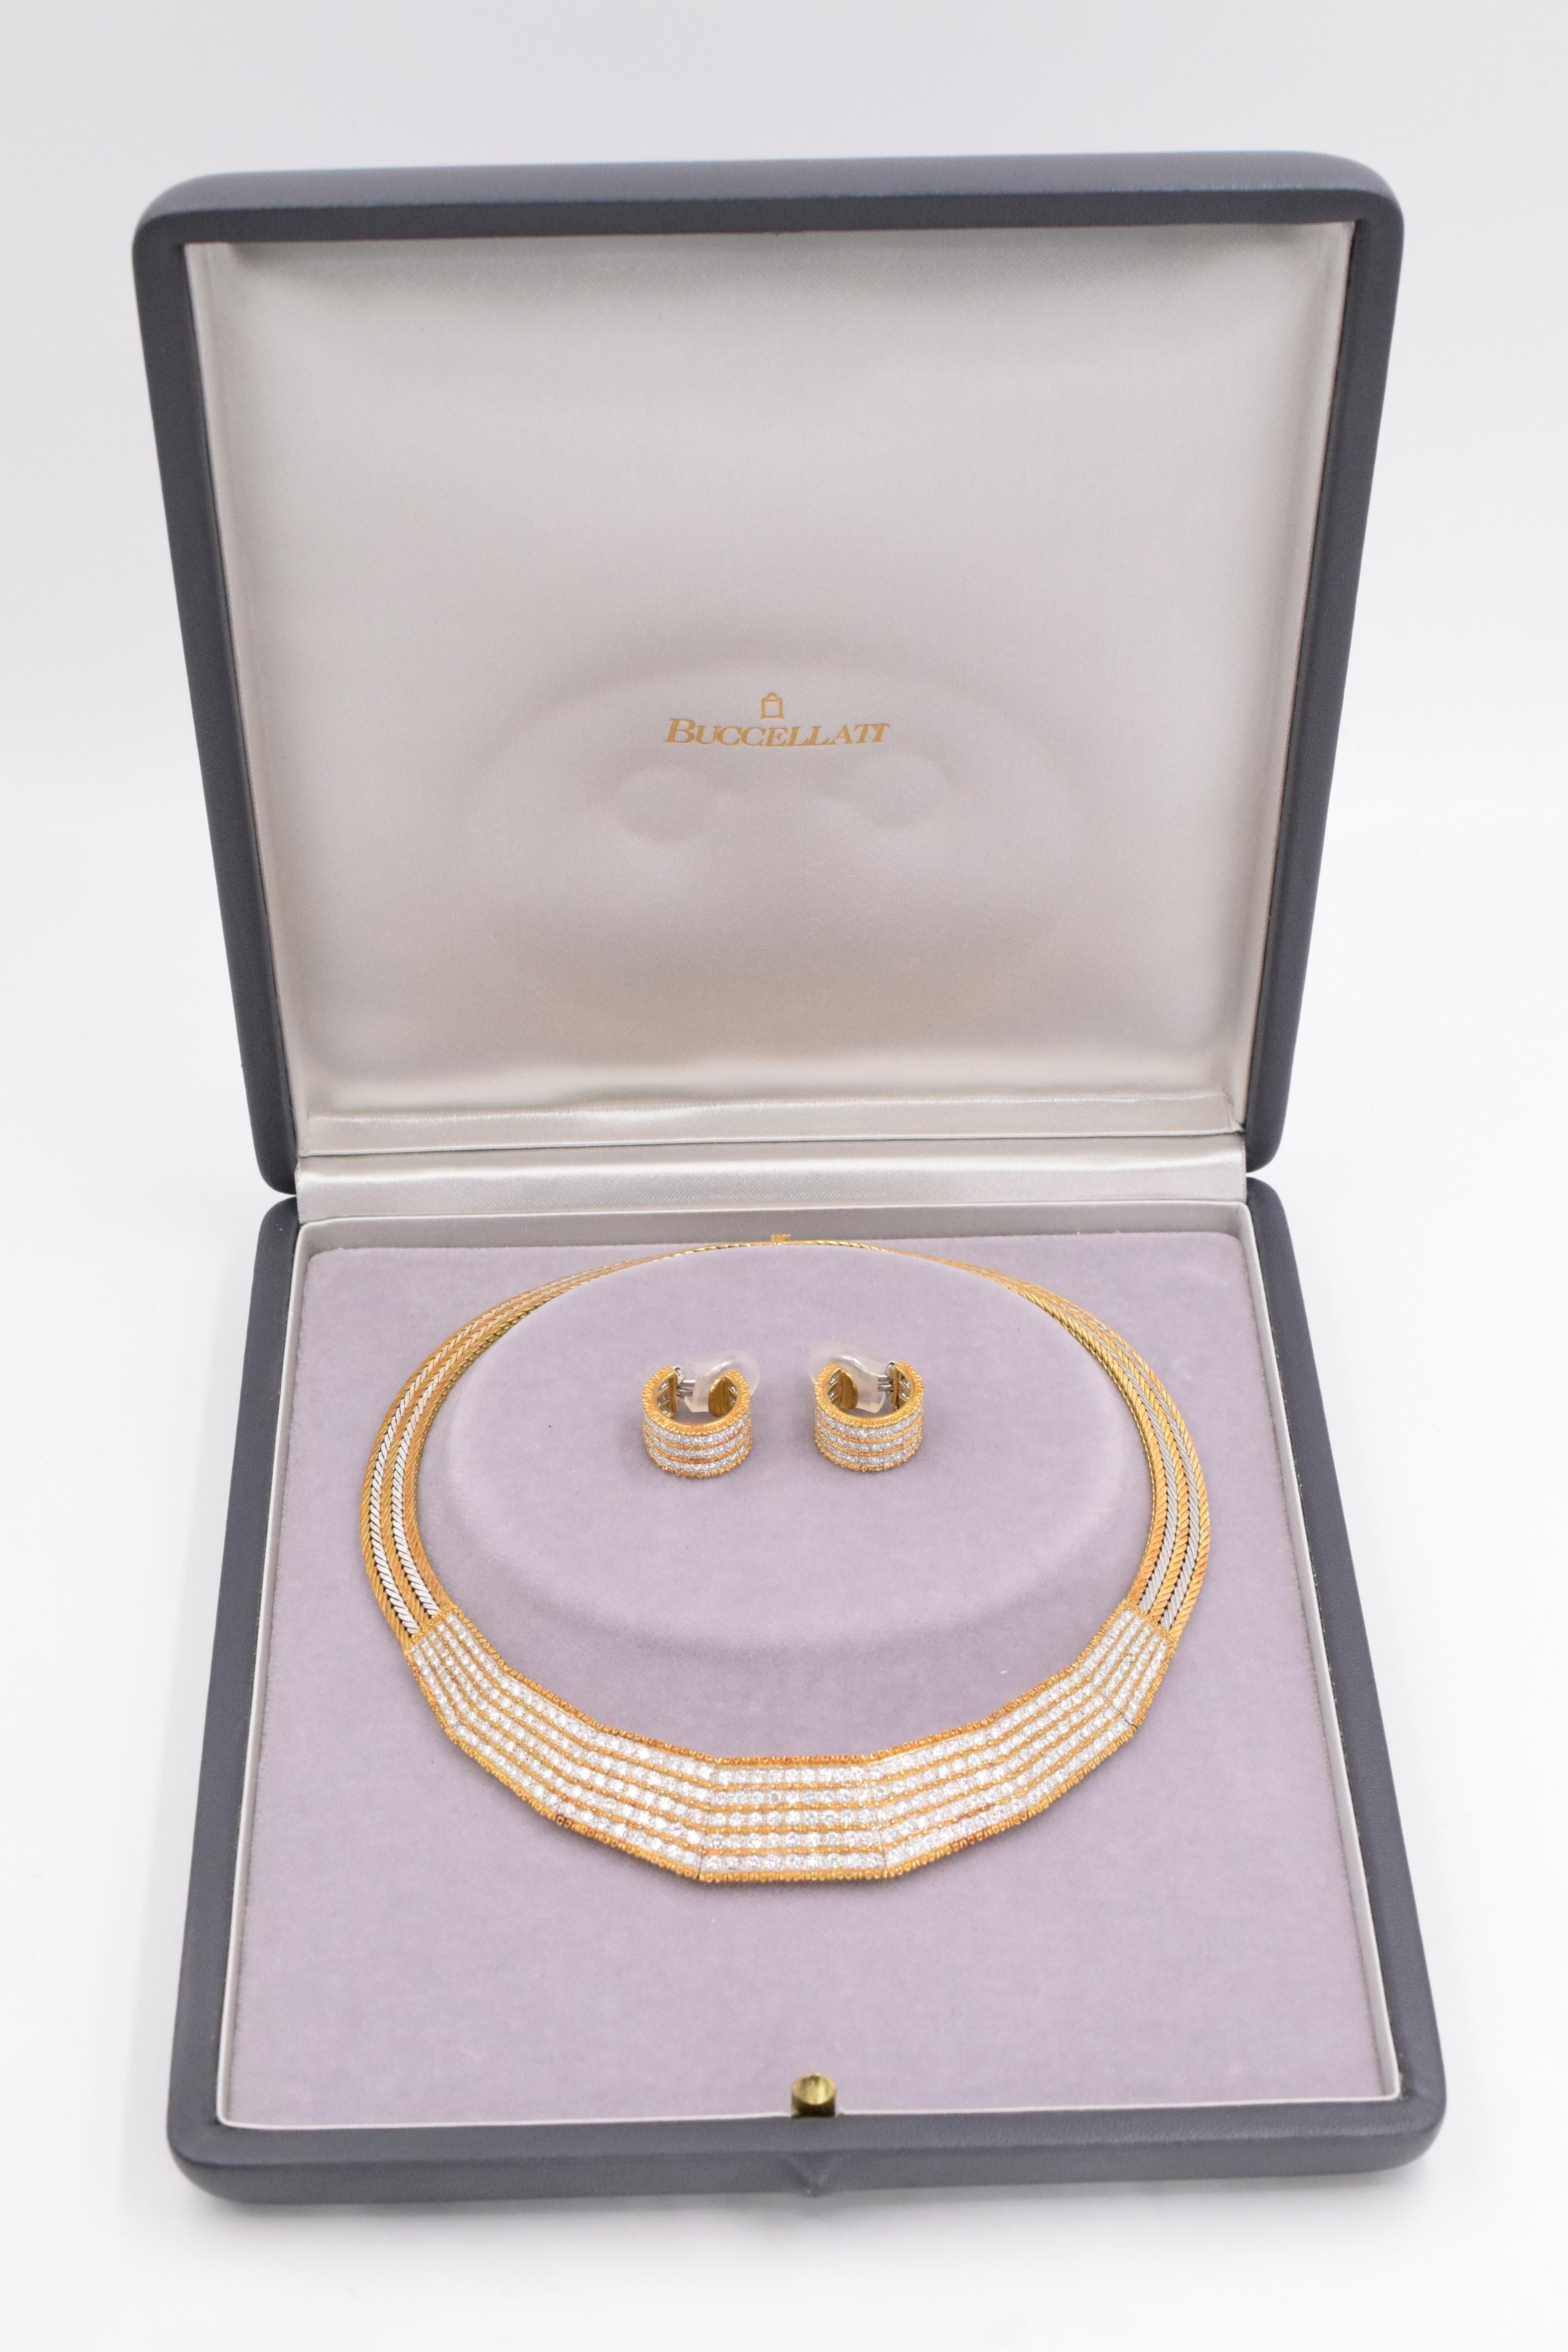 Buccellati Diamond and Two-tone Gold Necklace and Earrings Set This necklace has 285 round brilliant diamonds weighing approximately 12-13carats & earrings has 120 round brilliant diamonds weighing approximately 6 carats
Signed Gianmaria Buccellati,